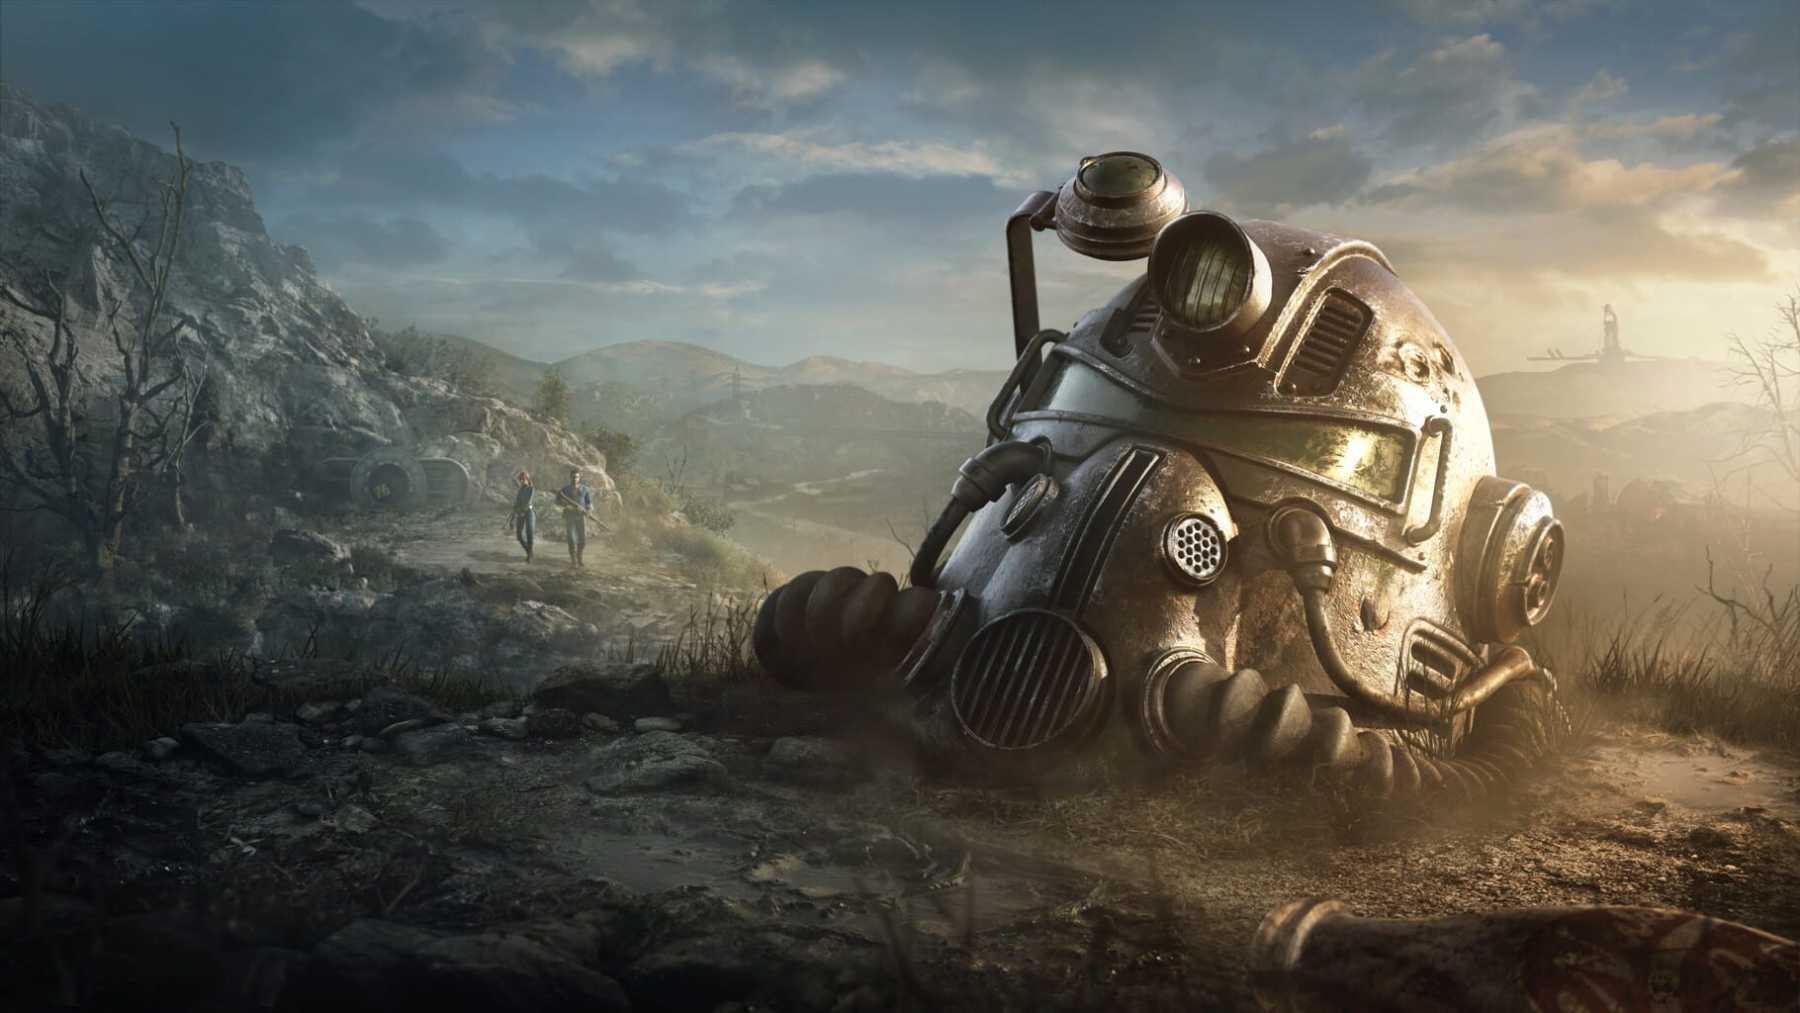 Best Side Quests From Fallout 76